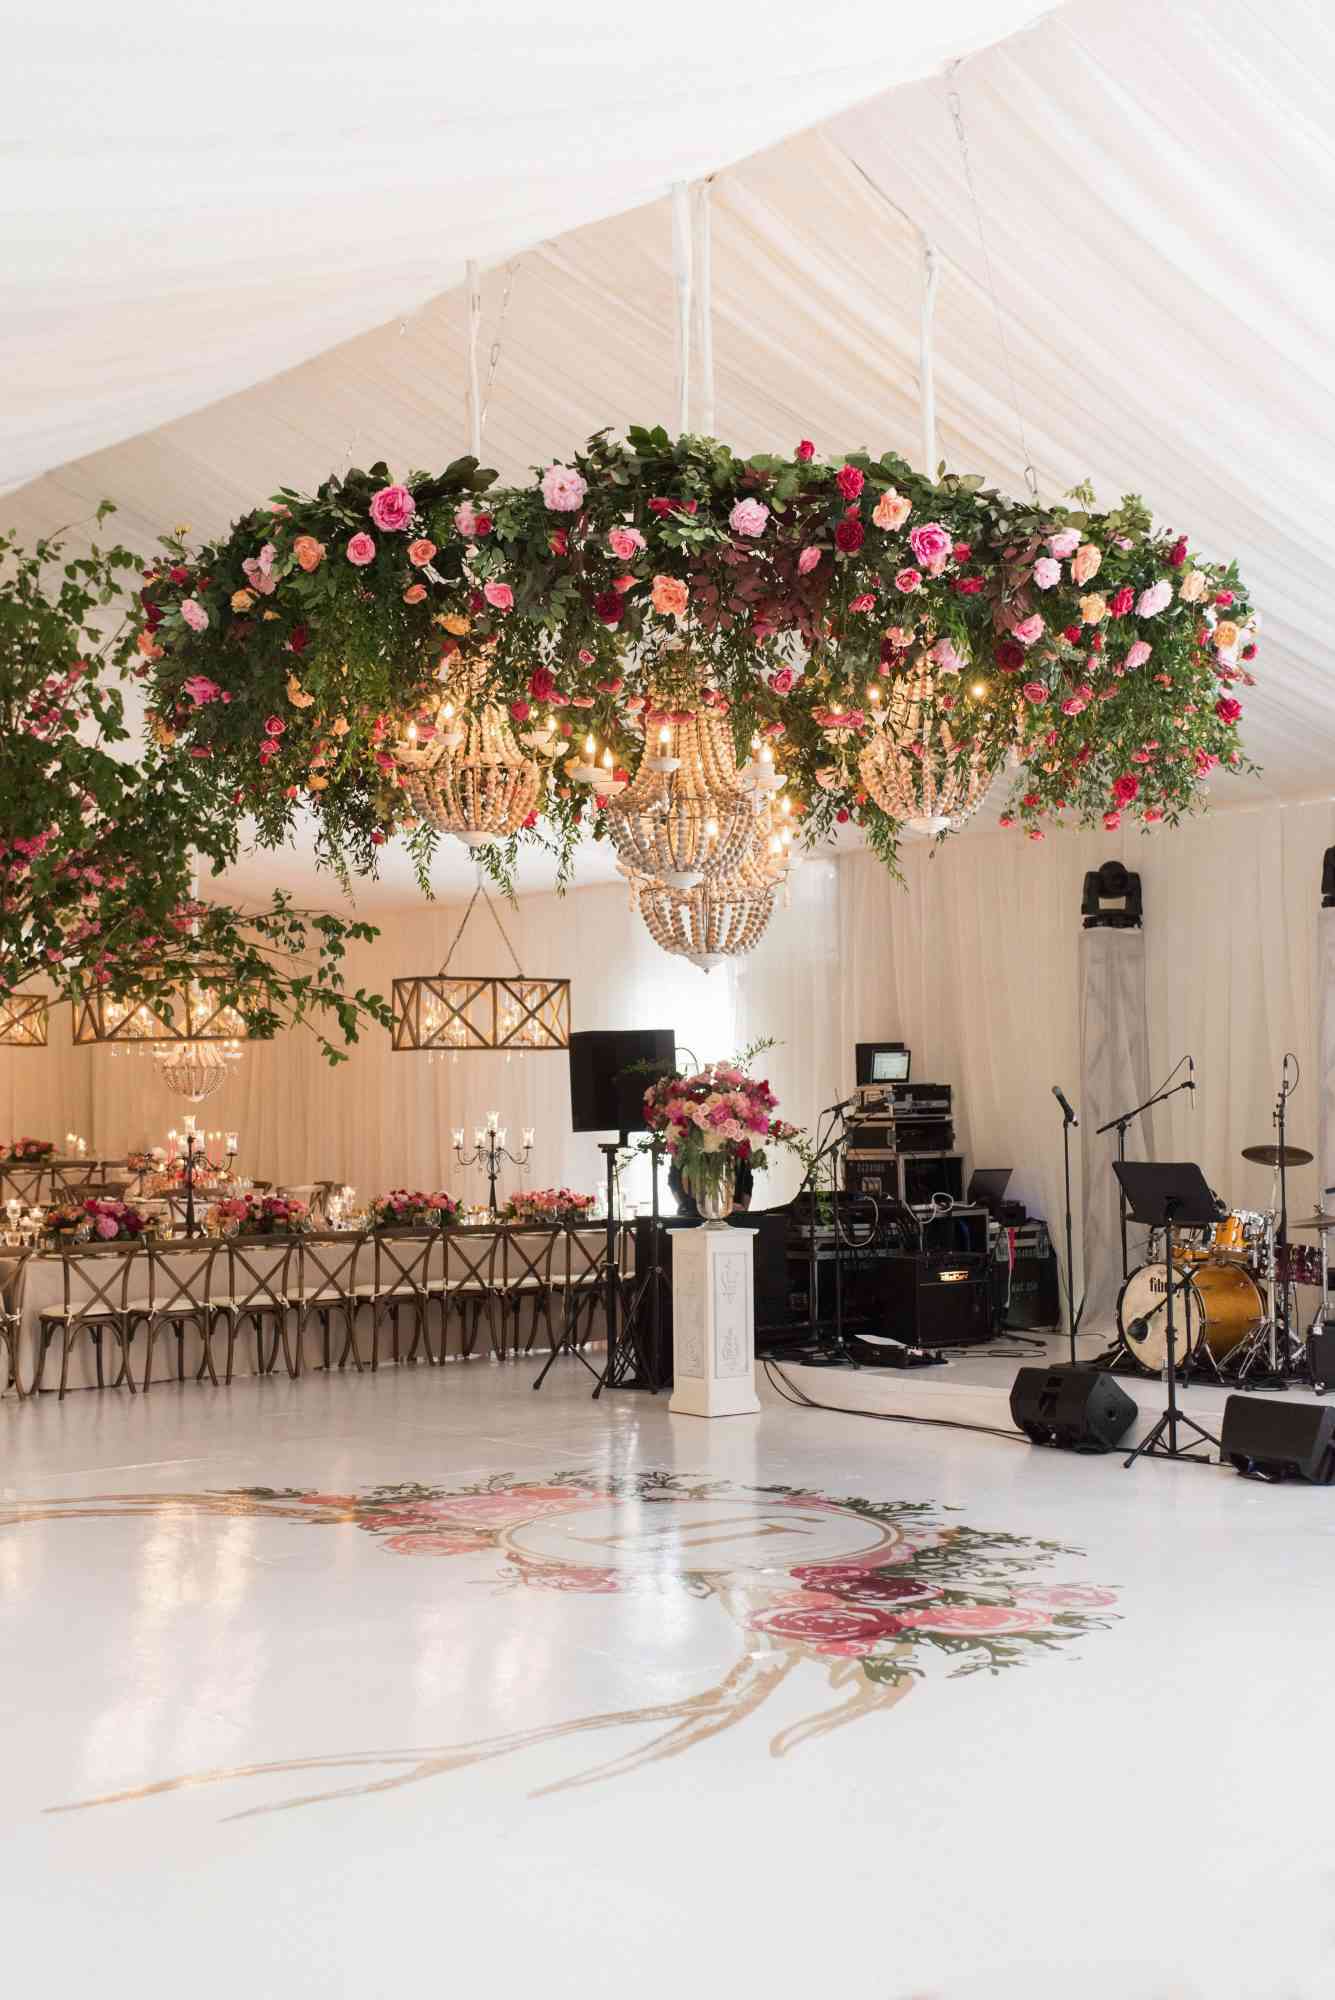 wedding chandelier with roses and greenery wood beams